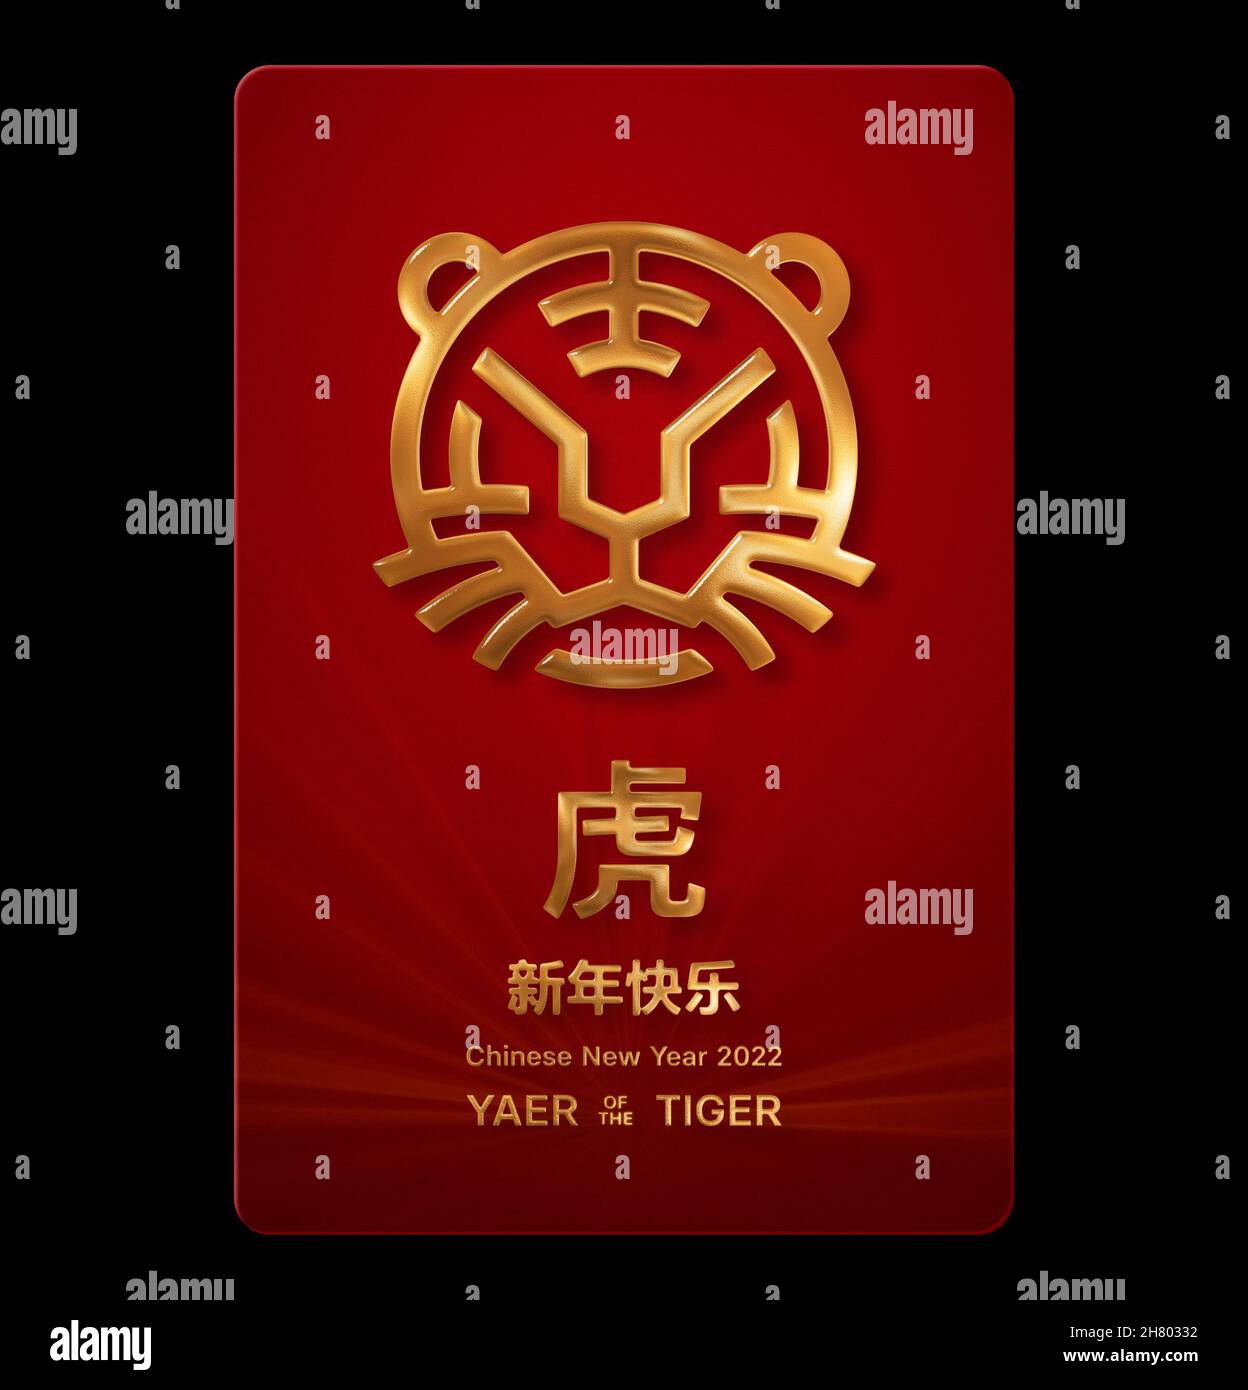 Happy Chinese New Year 2022 Greeting Card and Web Banner Graphic Design With the Chinese New Year Animal Zodiac Sign of the Year of the Tiger. Stock Photo